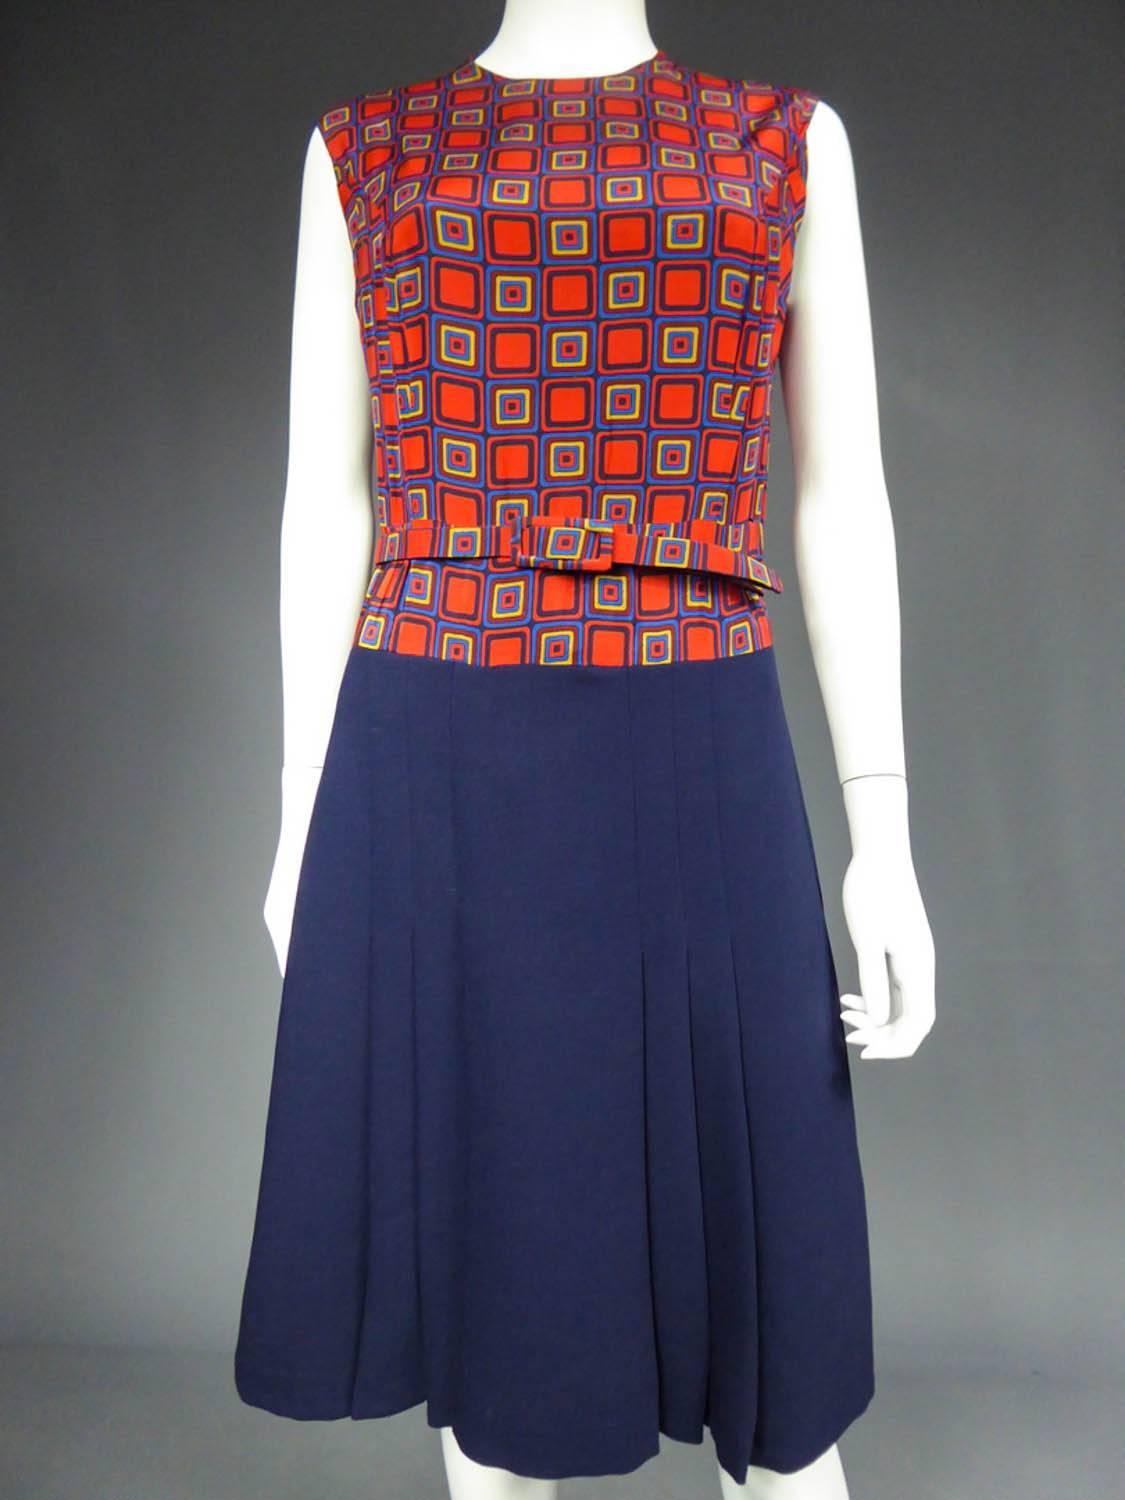 A French Couture dress and jacket in Pierre Balmain style - Circa 1972 For Sale 6